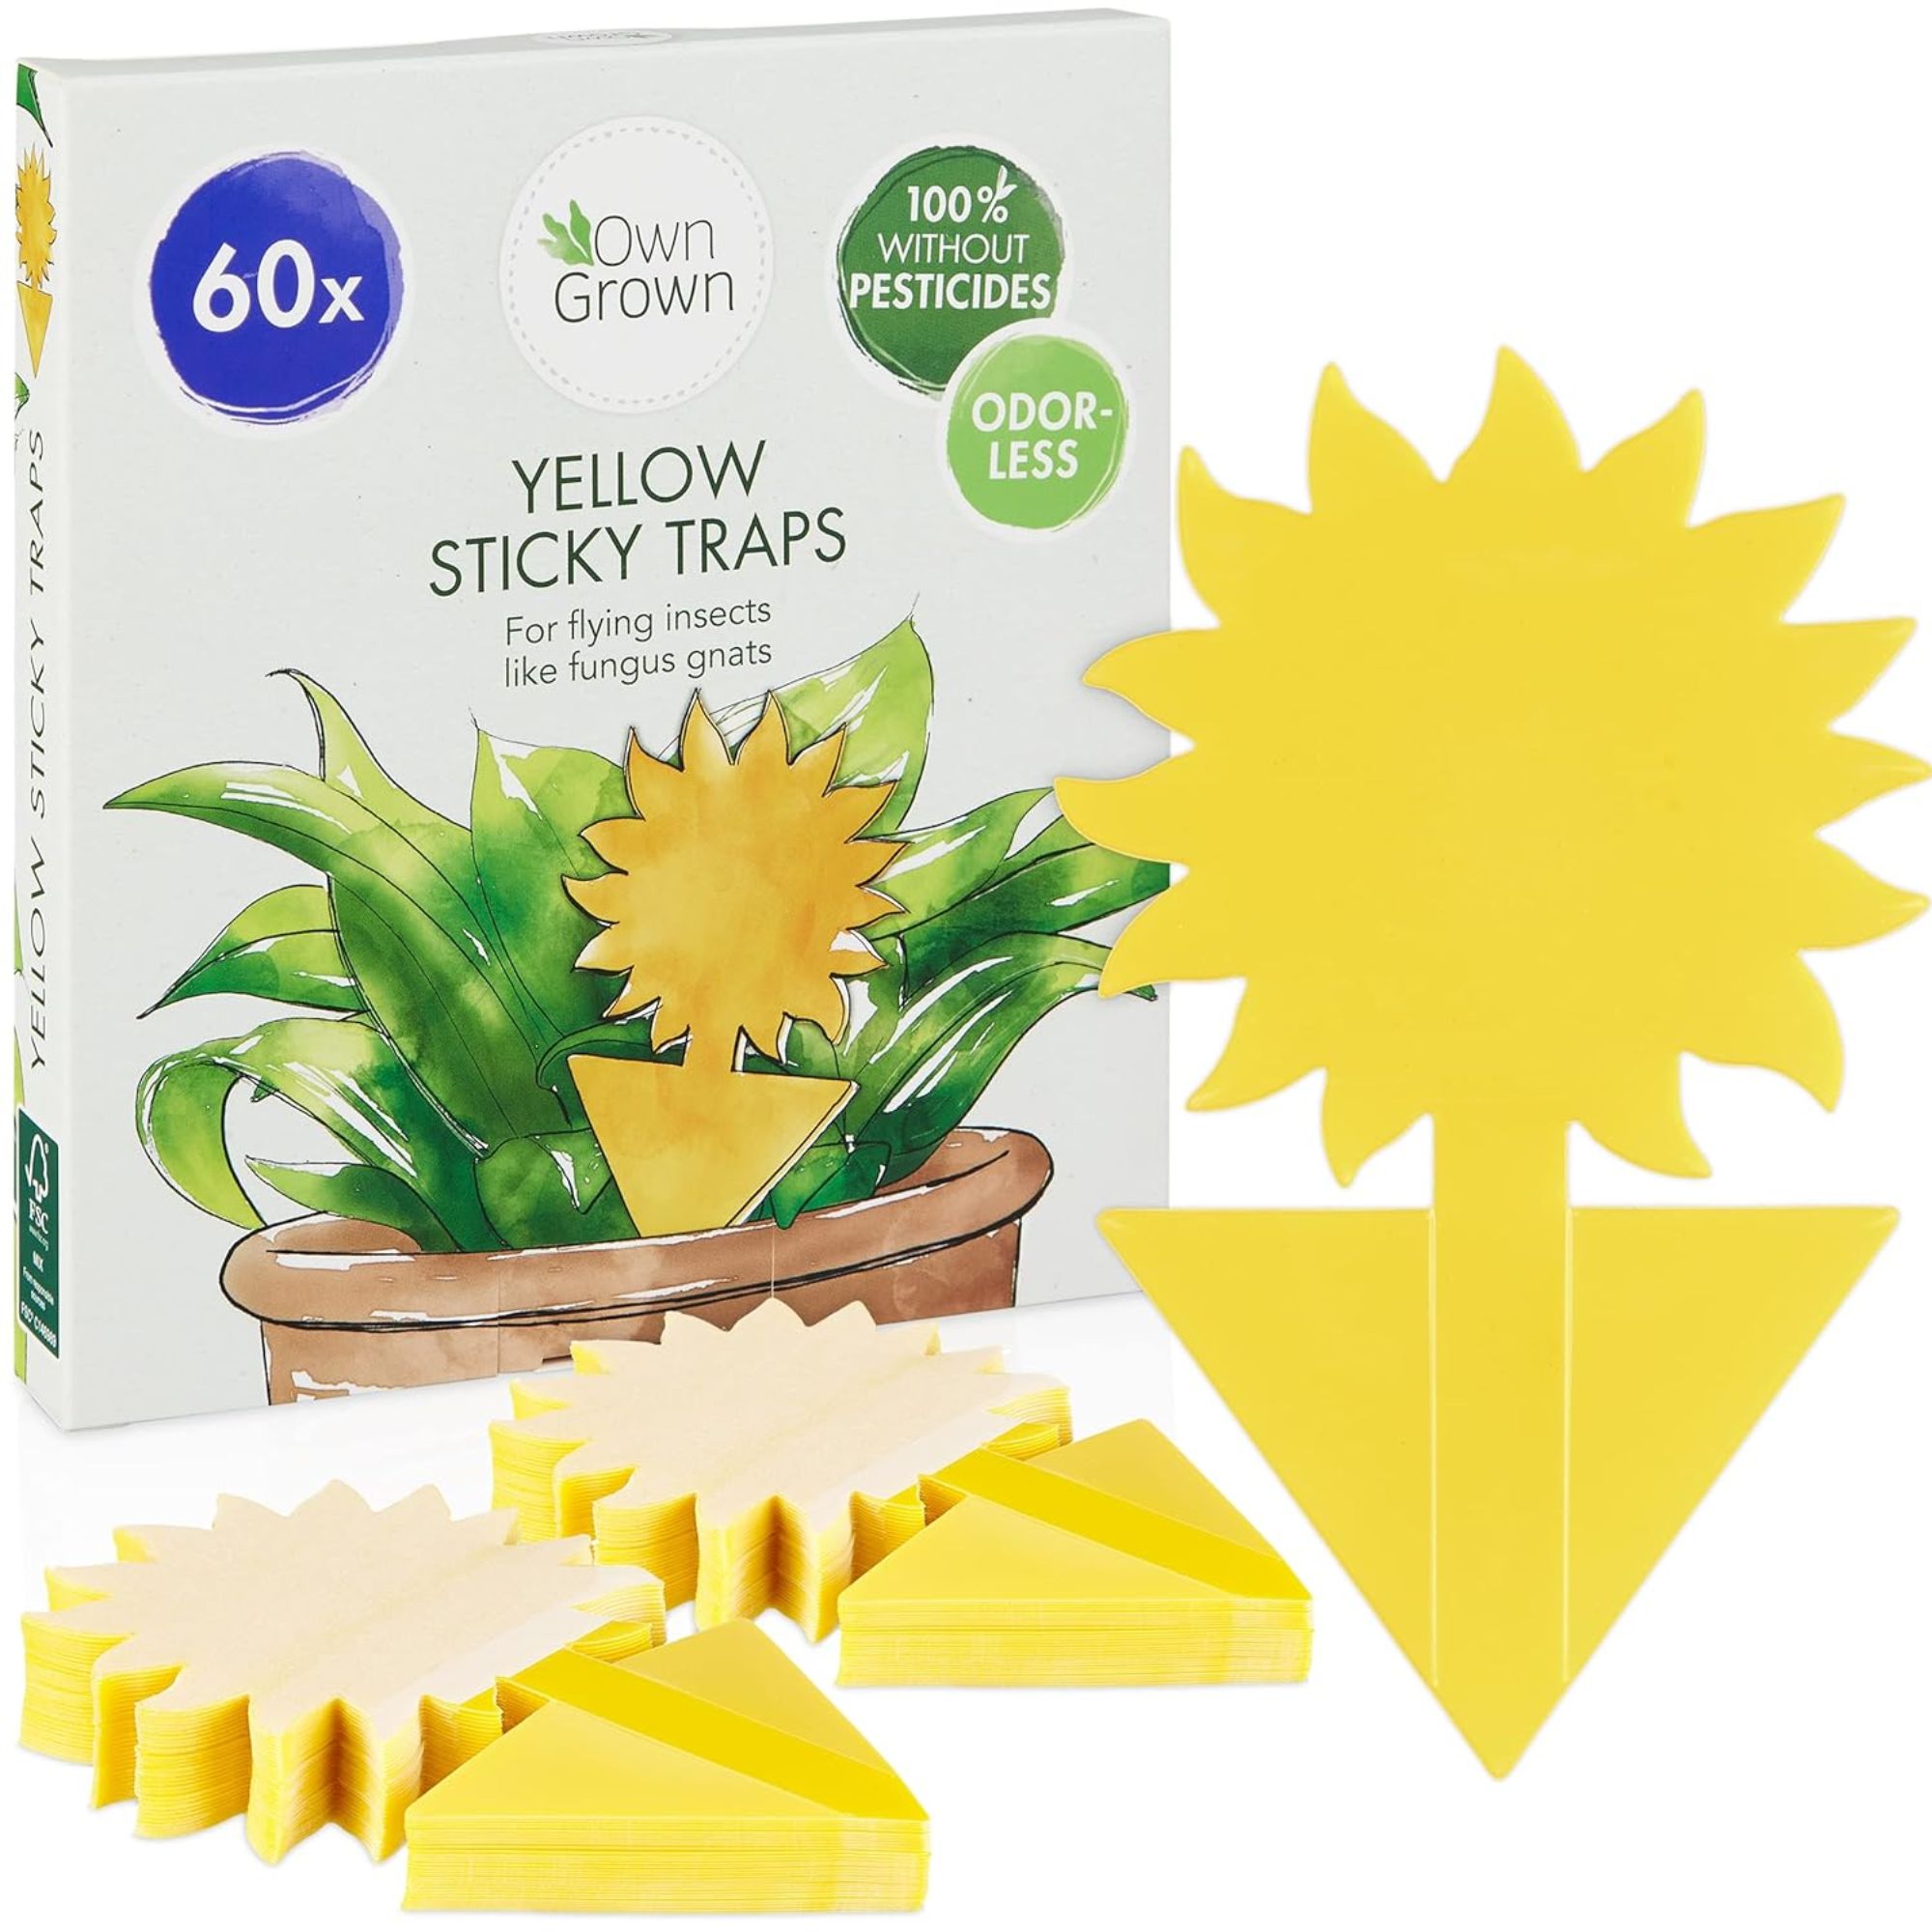 Yellow sticky traps for garden pests